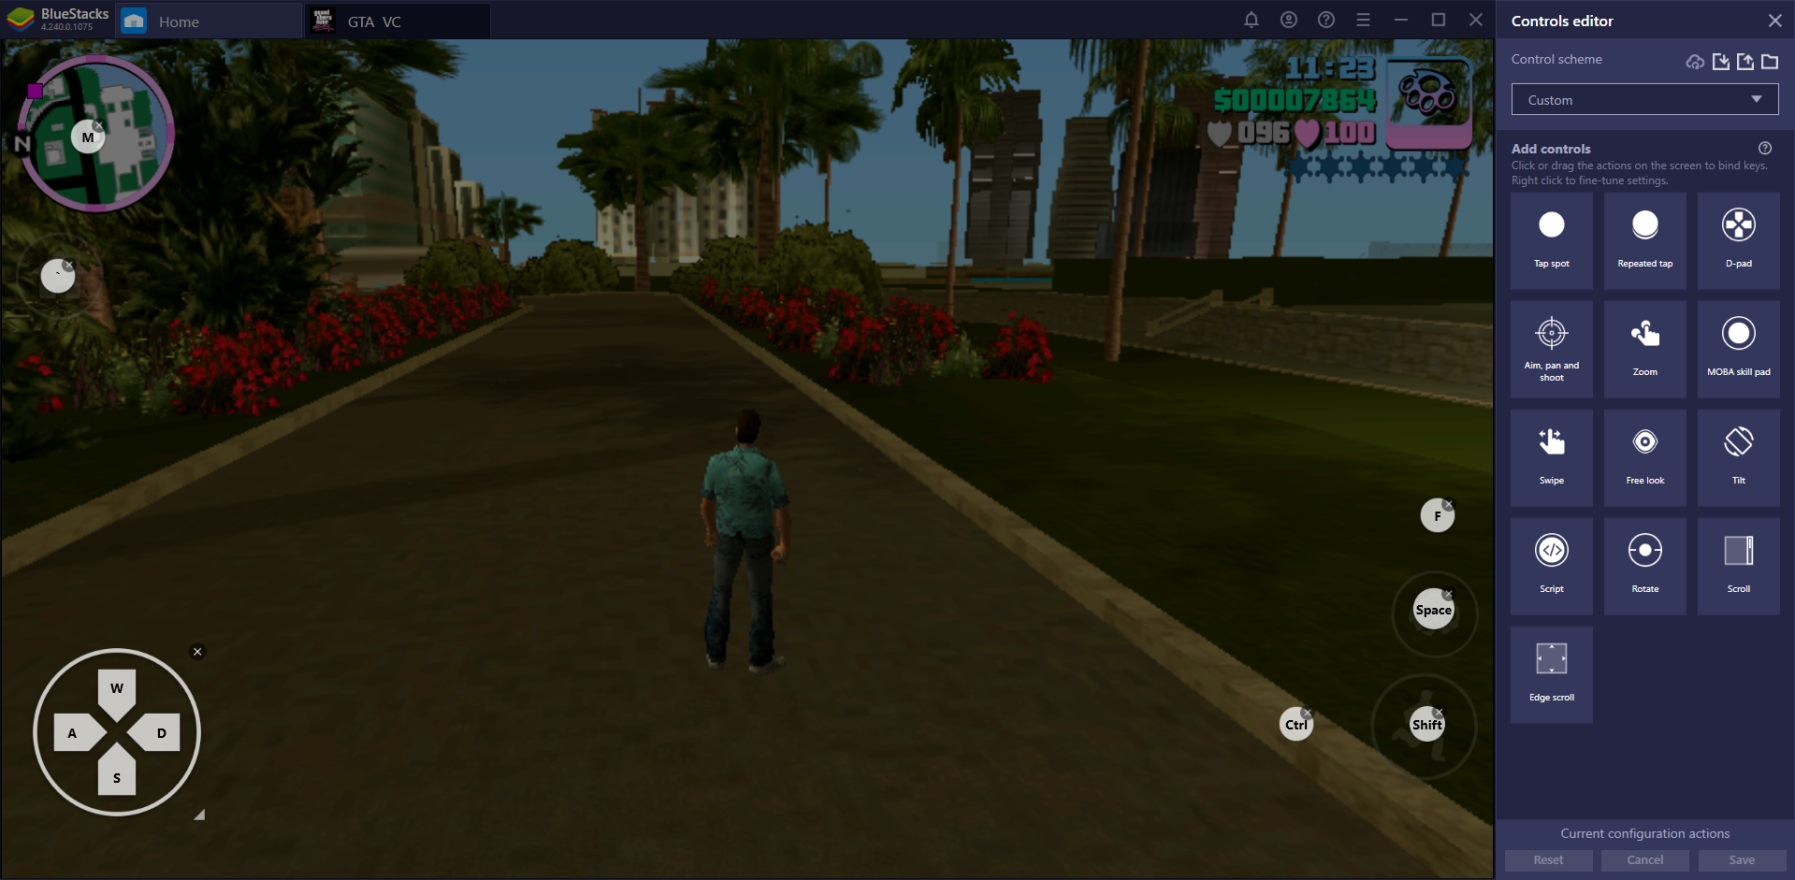 How To Play GTA Vice City On PC With BlueStacks